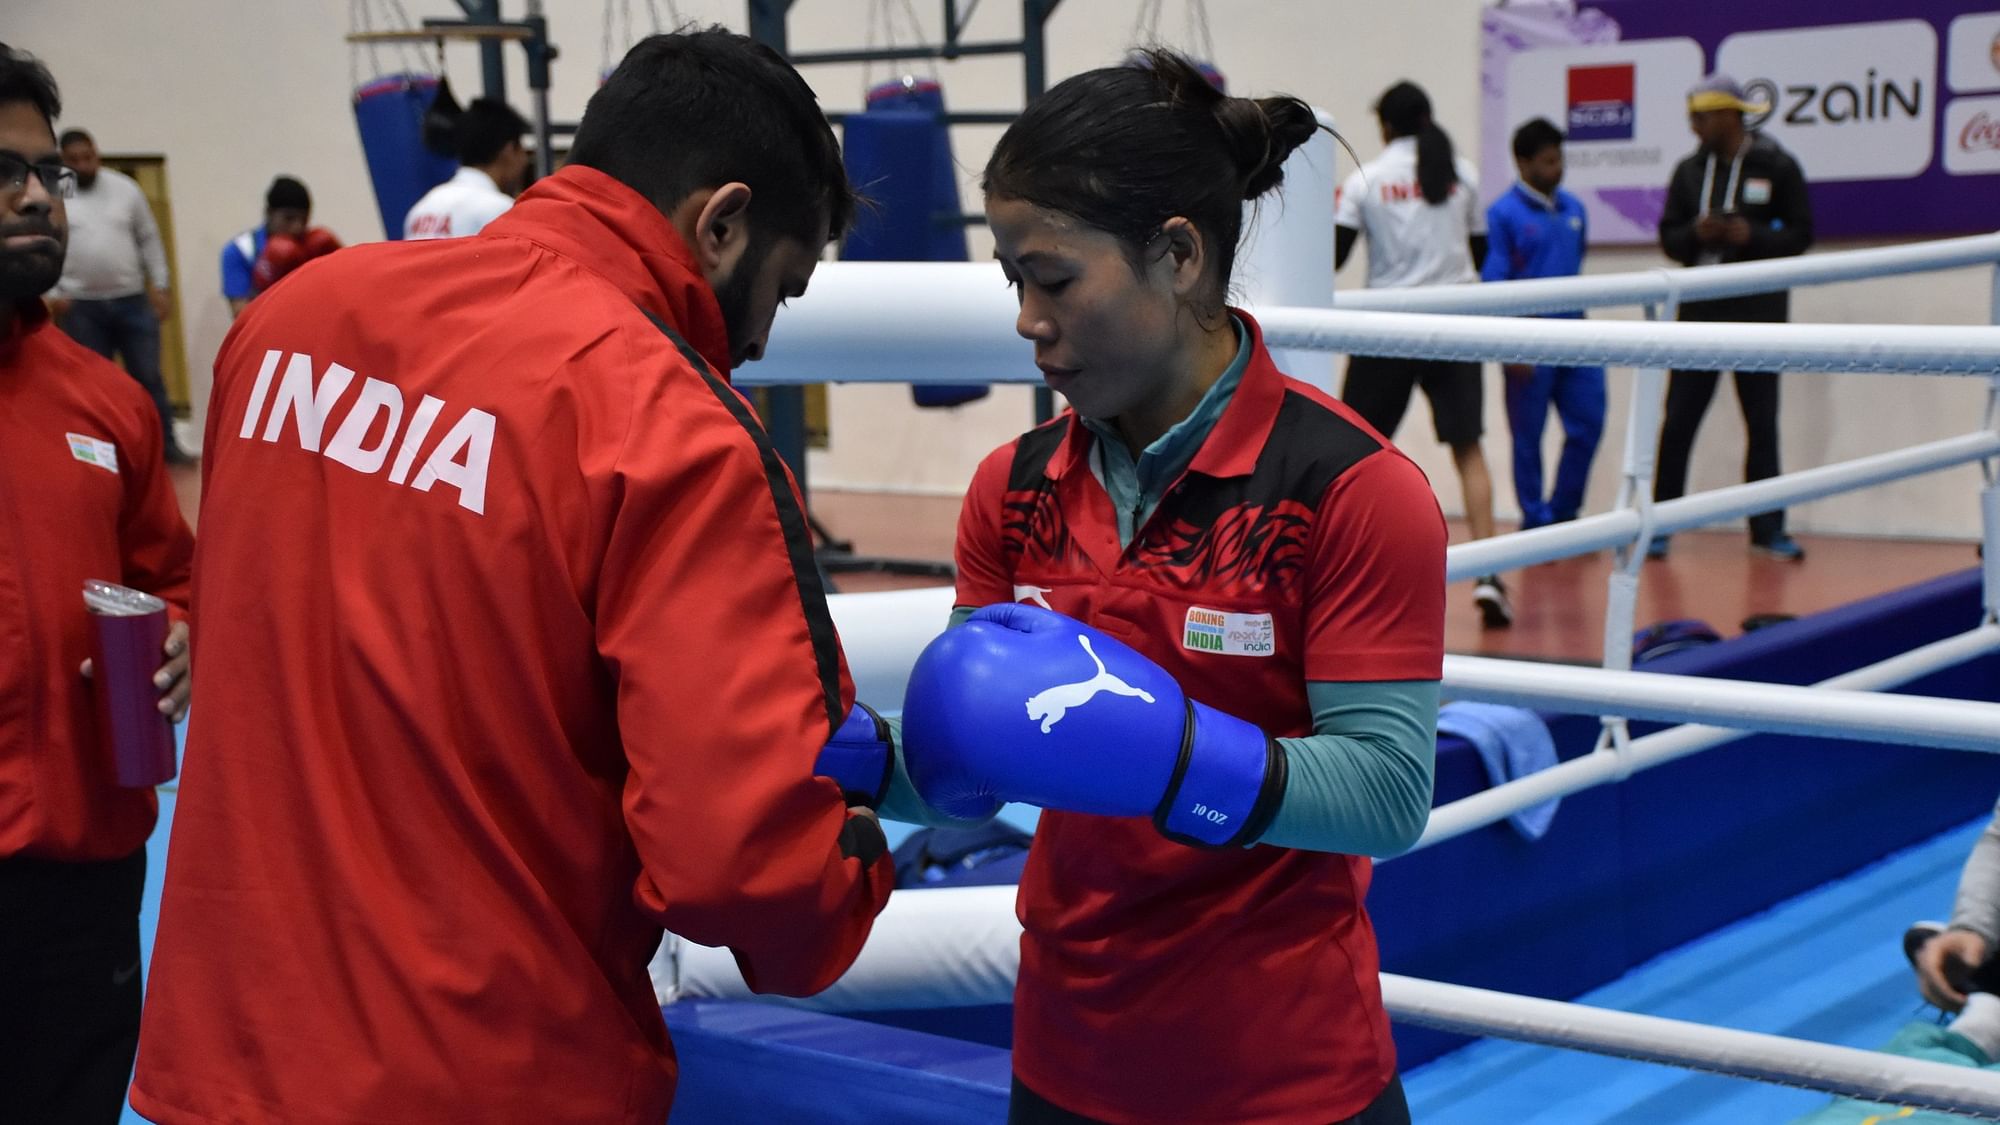 The Indian boxers were training in Italy, one of the worst-affected by the coronavirus pandemic, till 26 February.